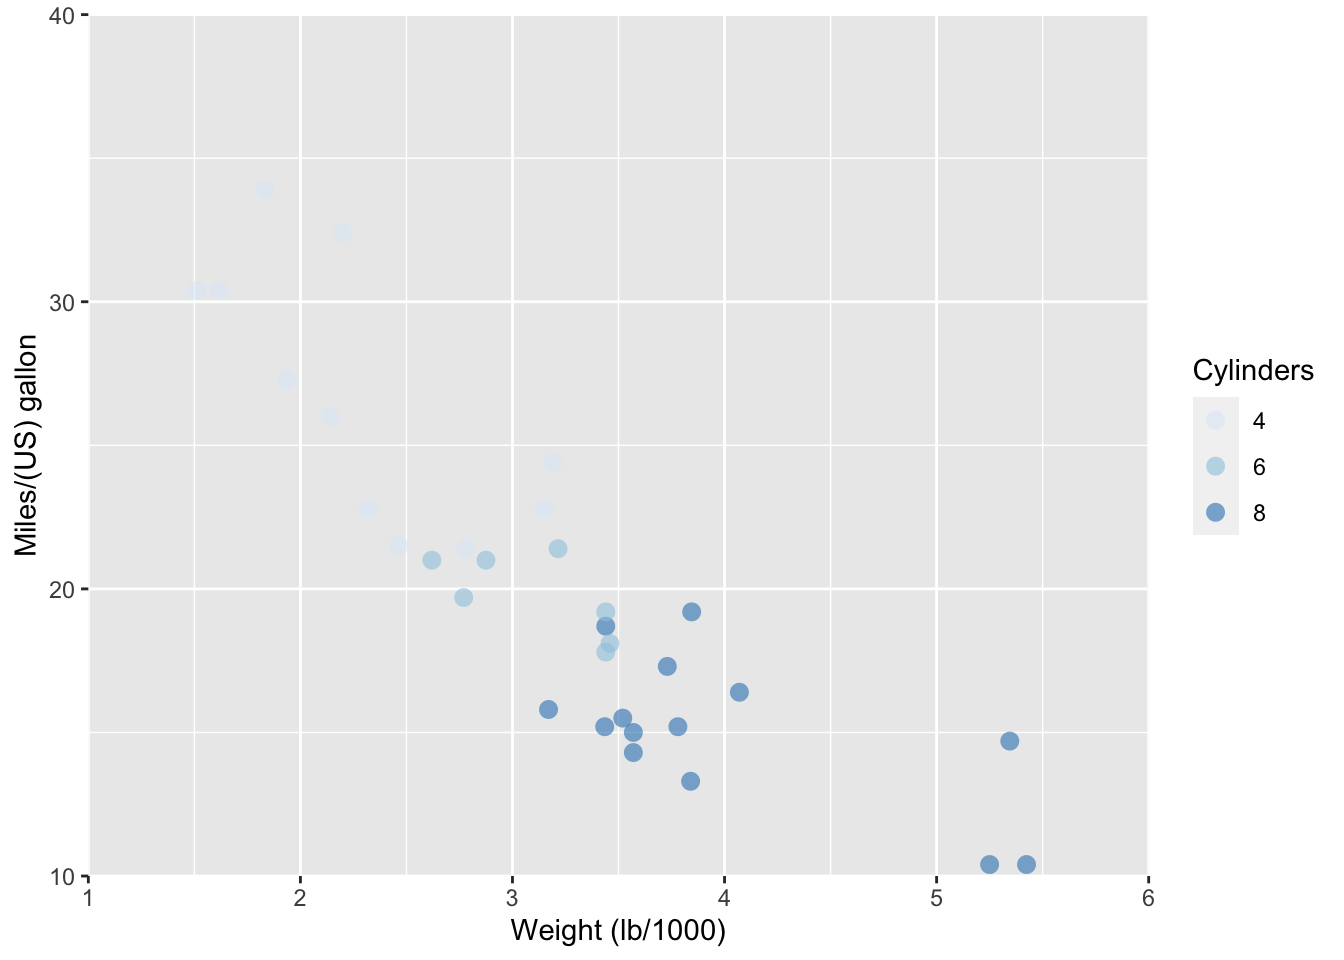 The ggplot2 default theme_gray() and magnified theme_bw().